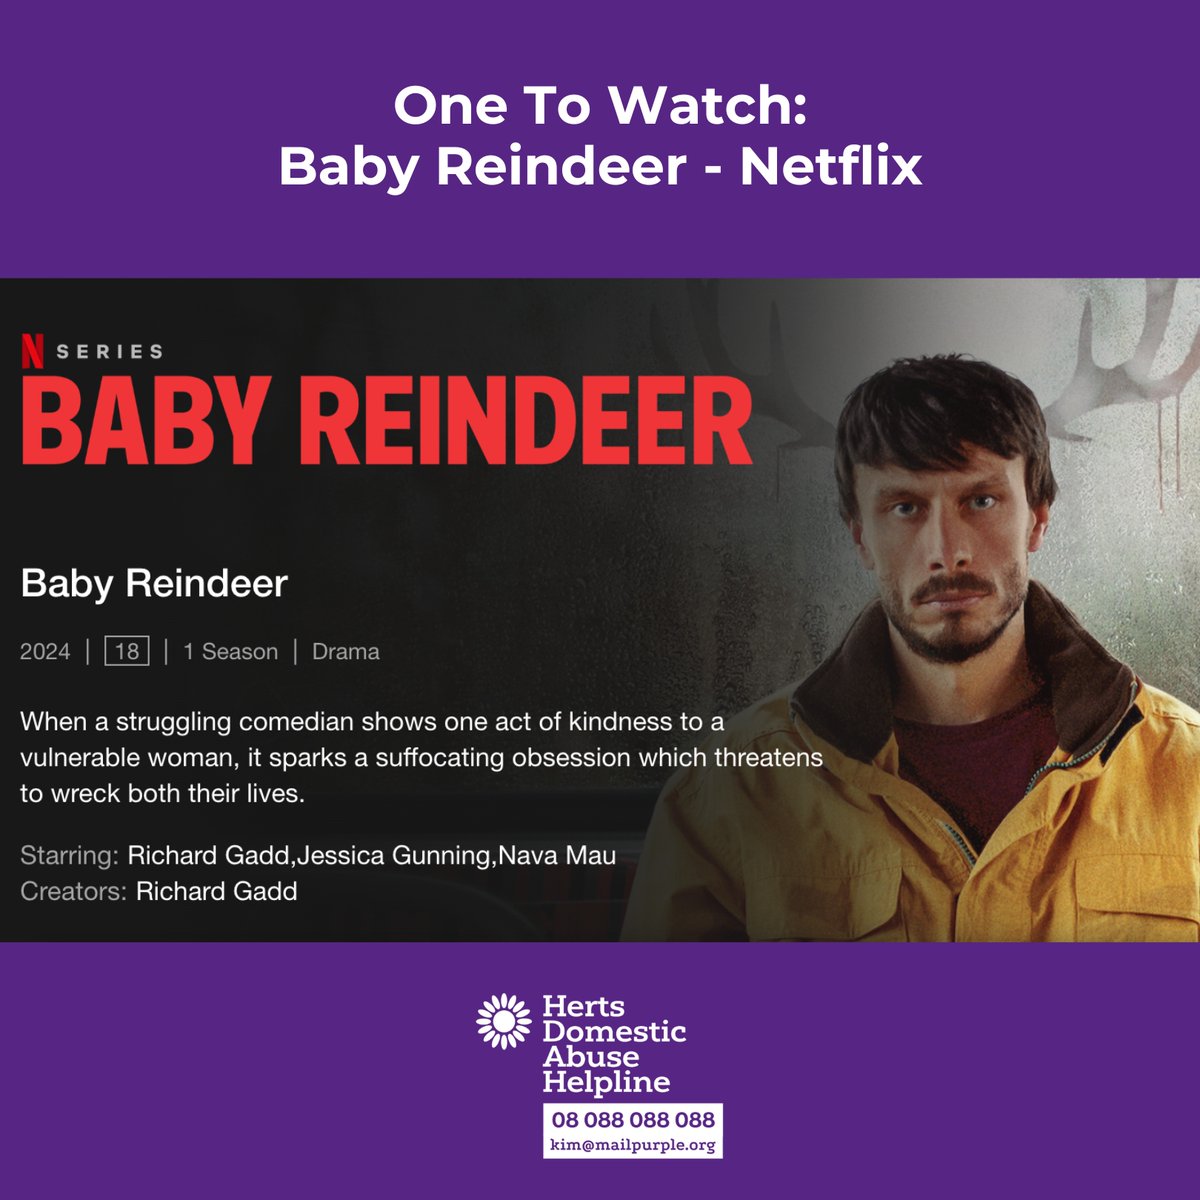 One To Watch... Baby Reindeer, a true story, follows Richard Gadd's warped relationship with his female stalker and the impact it has on him as he is ultimately forced to face a deep, dark buried trauma. Watch on netflix now at netflix.com/gb/title/81219… #babyreindeer #stalking